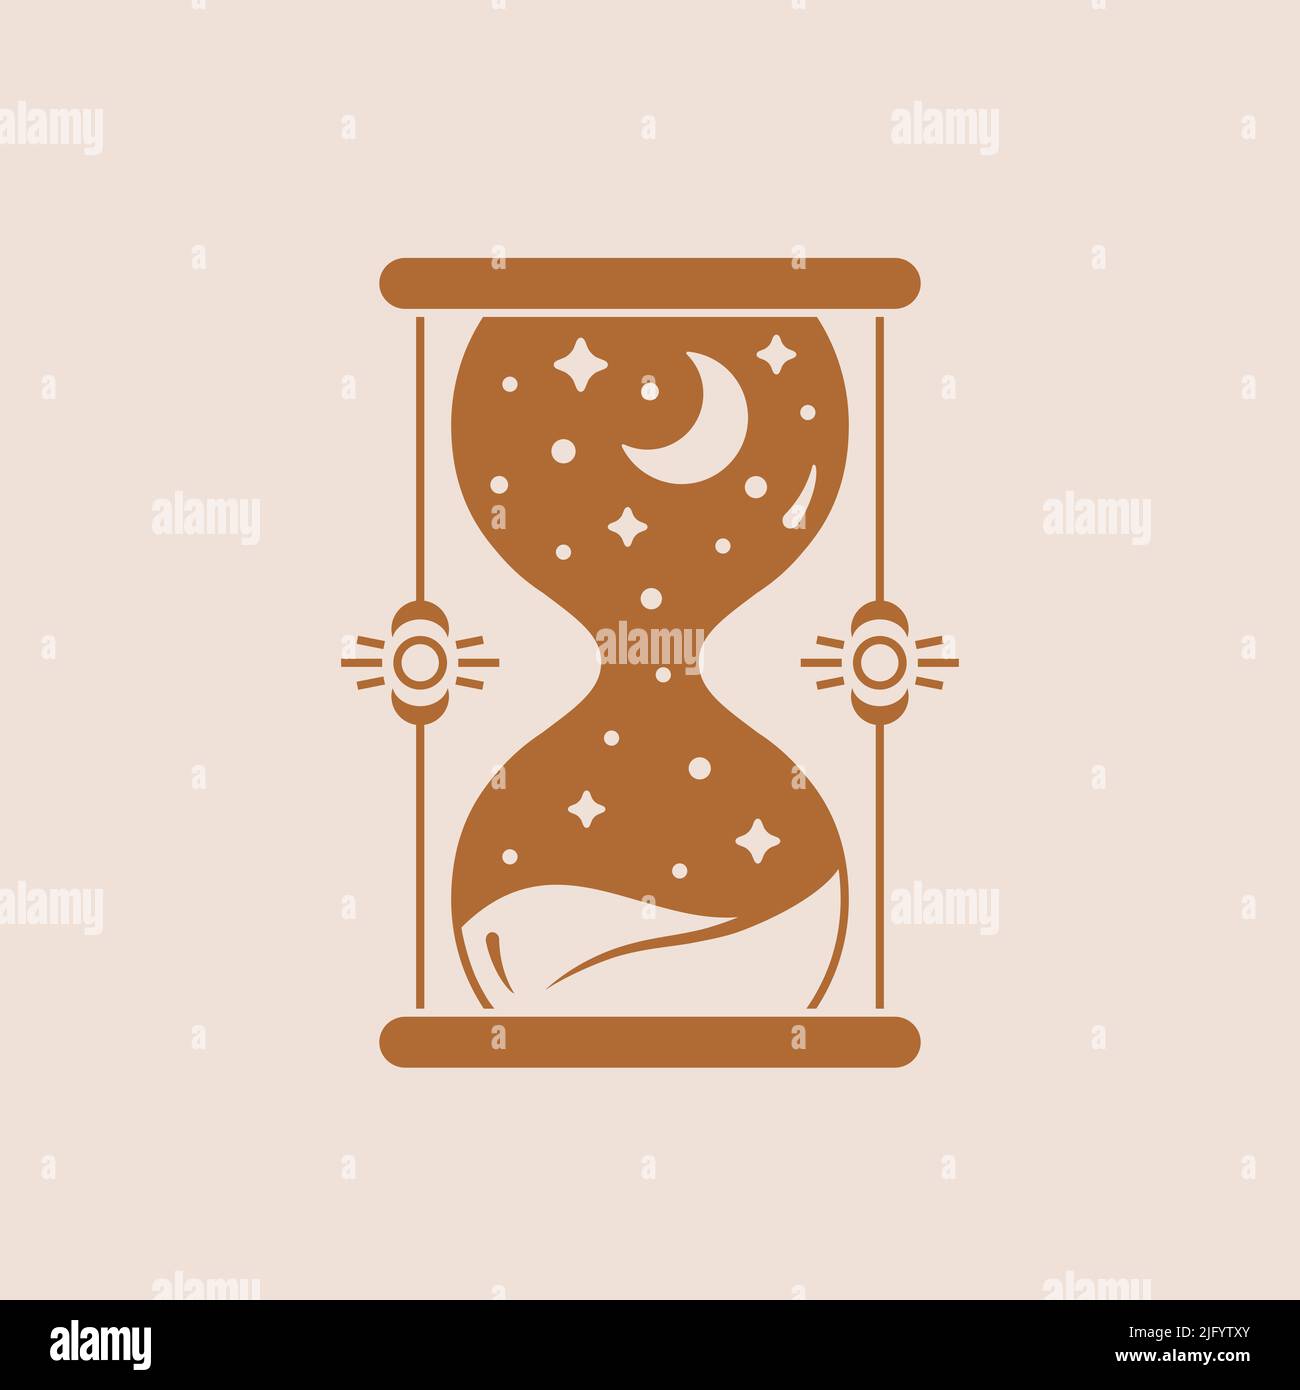 Hourglass logo. Trendy boho illustration with sandglass, moon and stars. Vector isolated esoteric emblem. Stock Vector